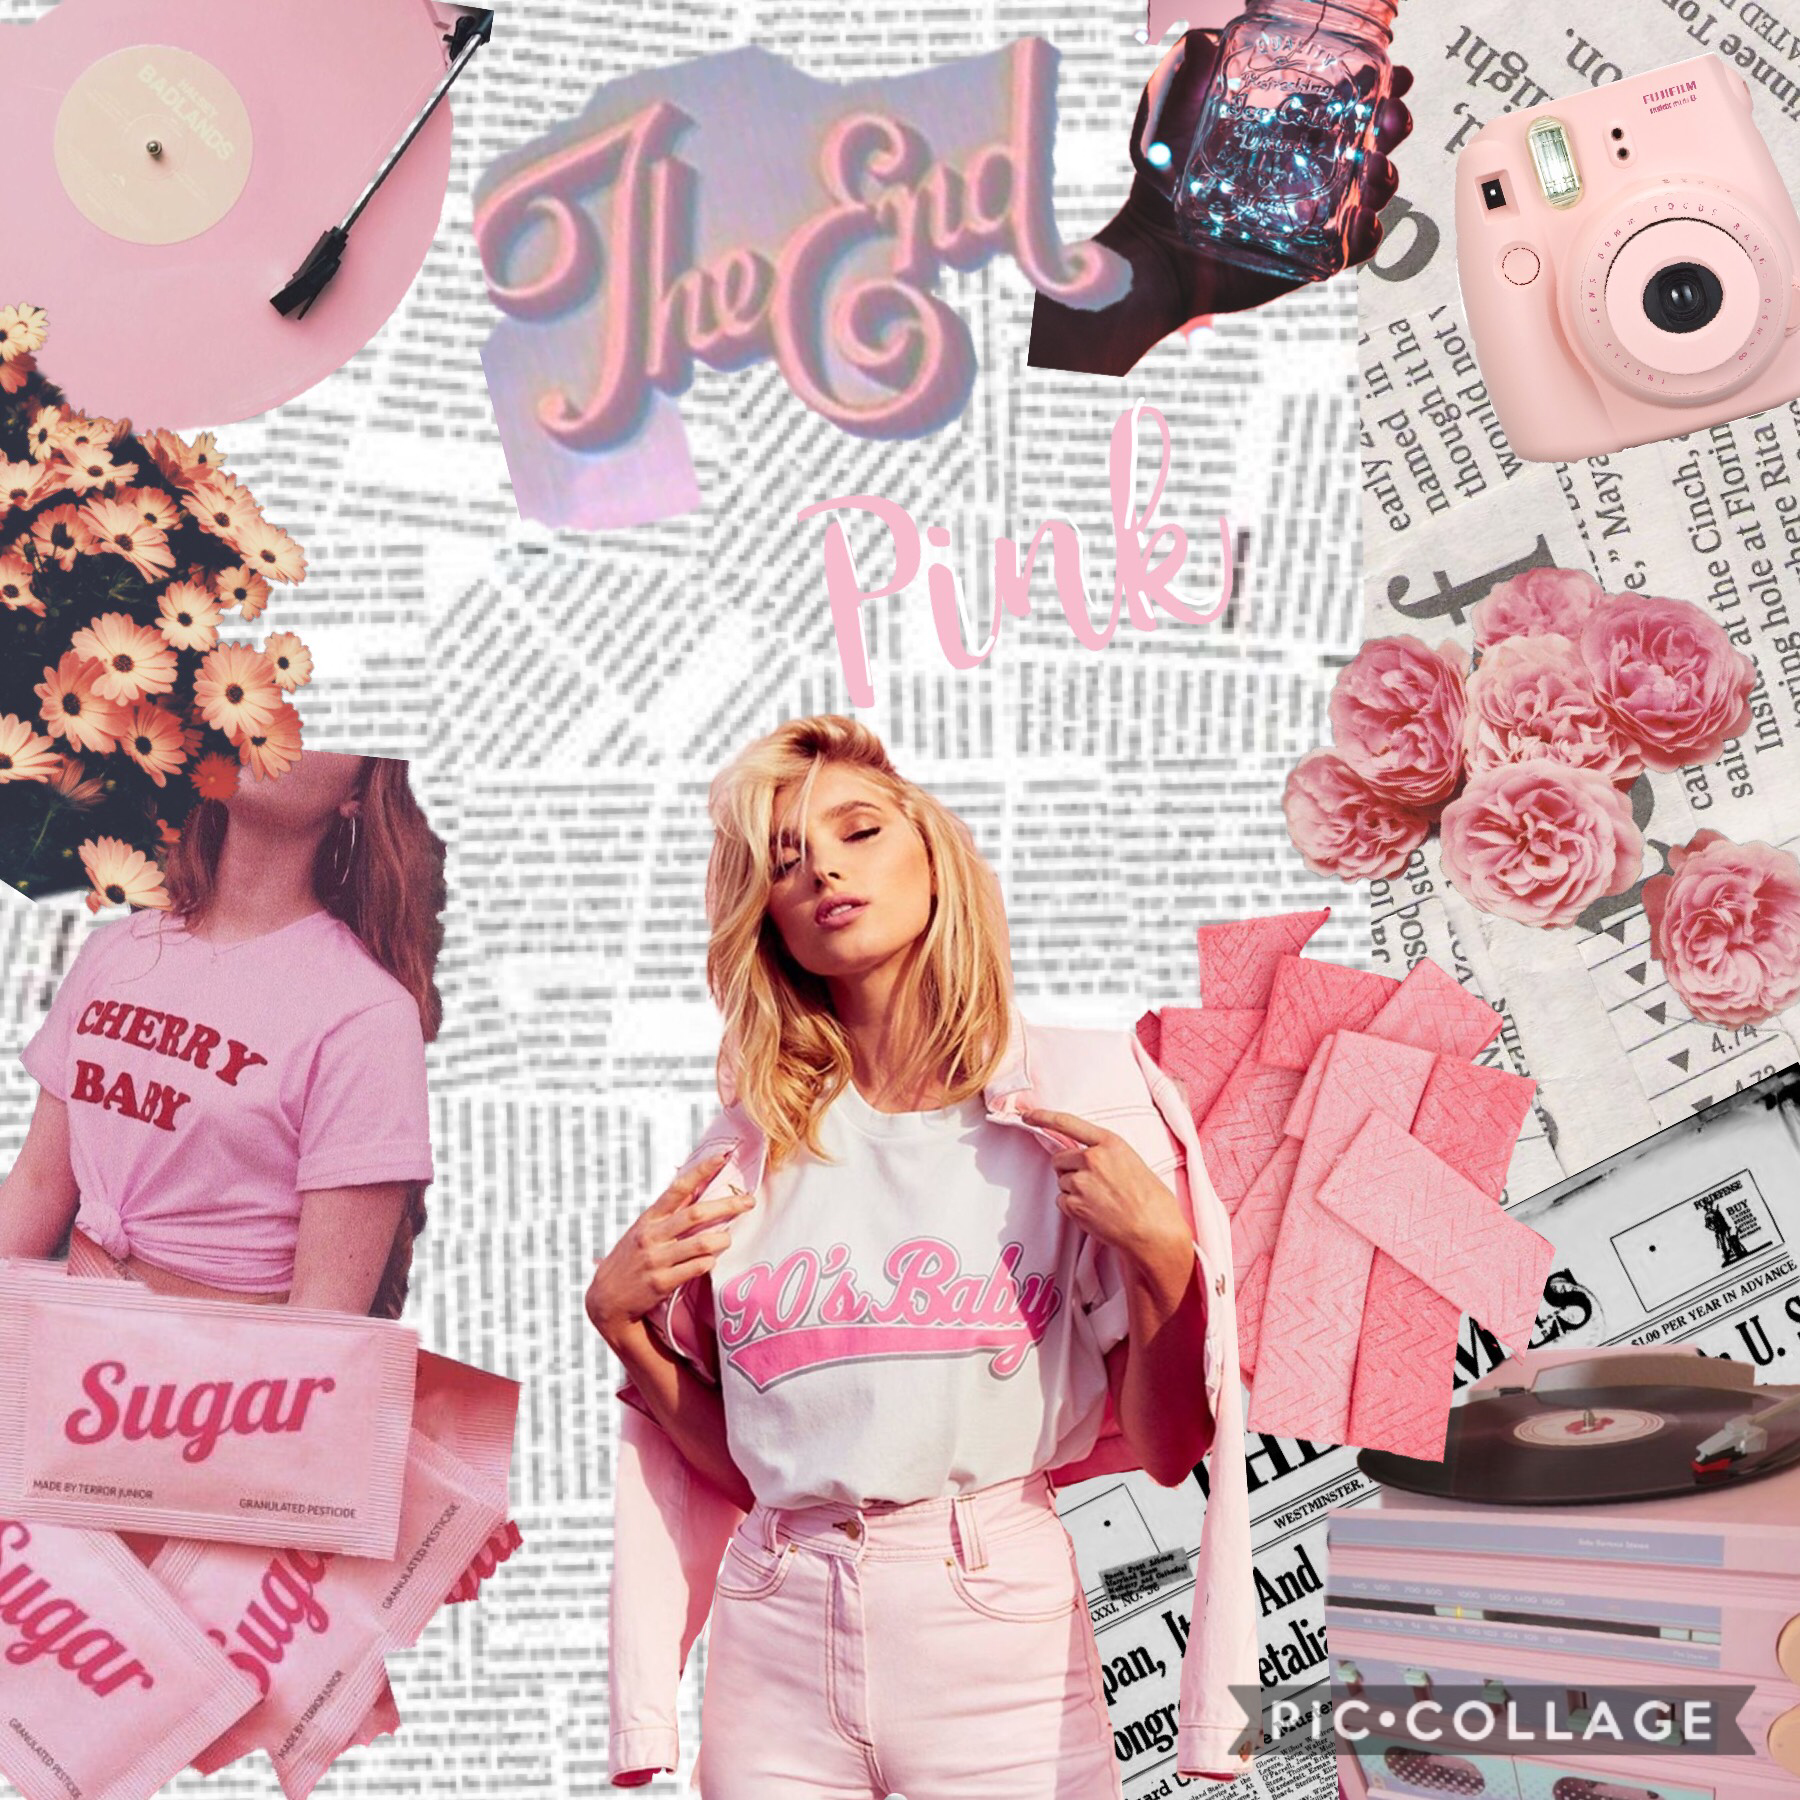 Pink baby 🌸💕👄👚👙👛

Comment other aesthetic colours for next collage.